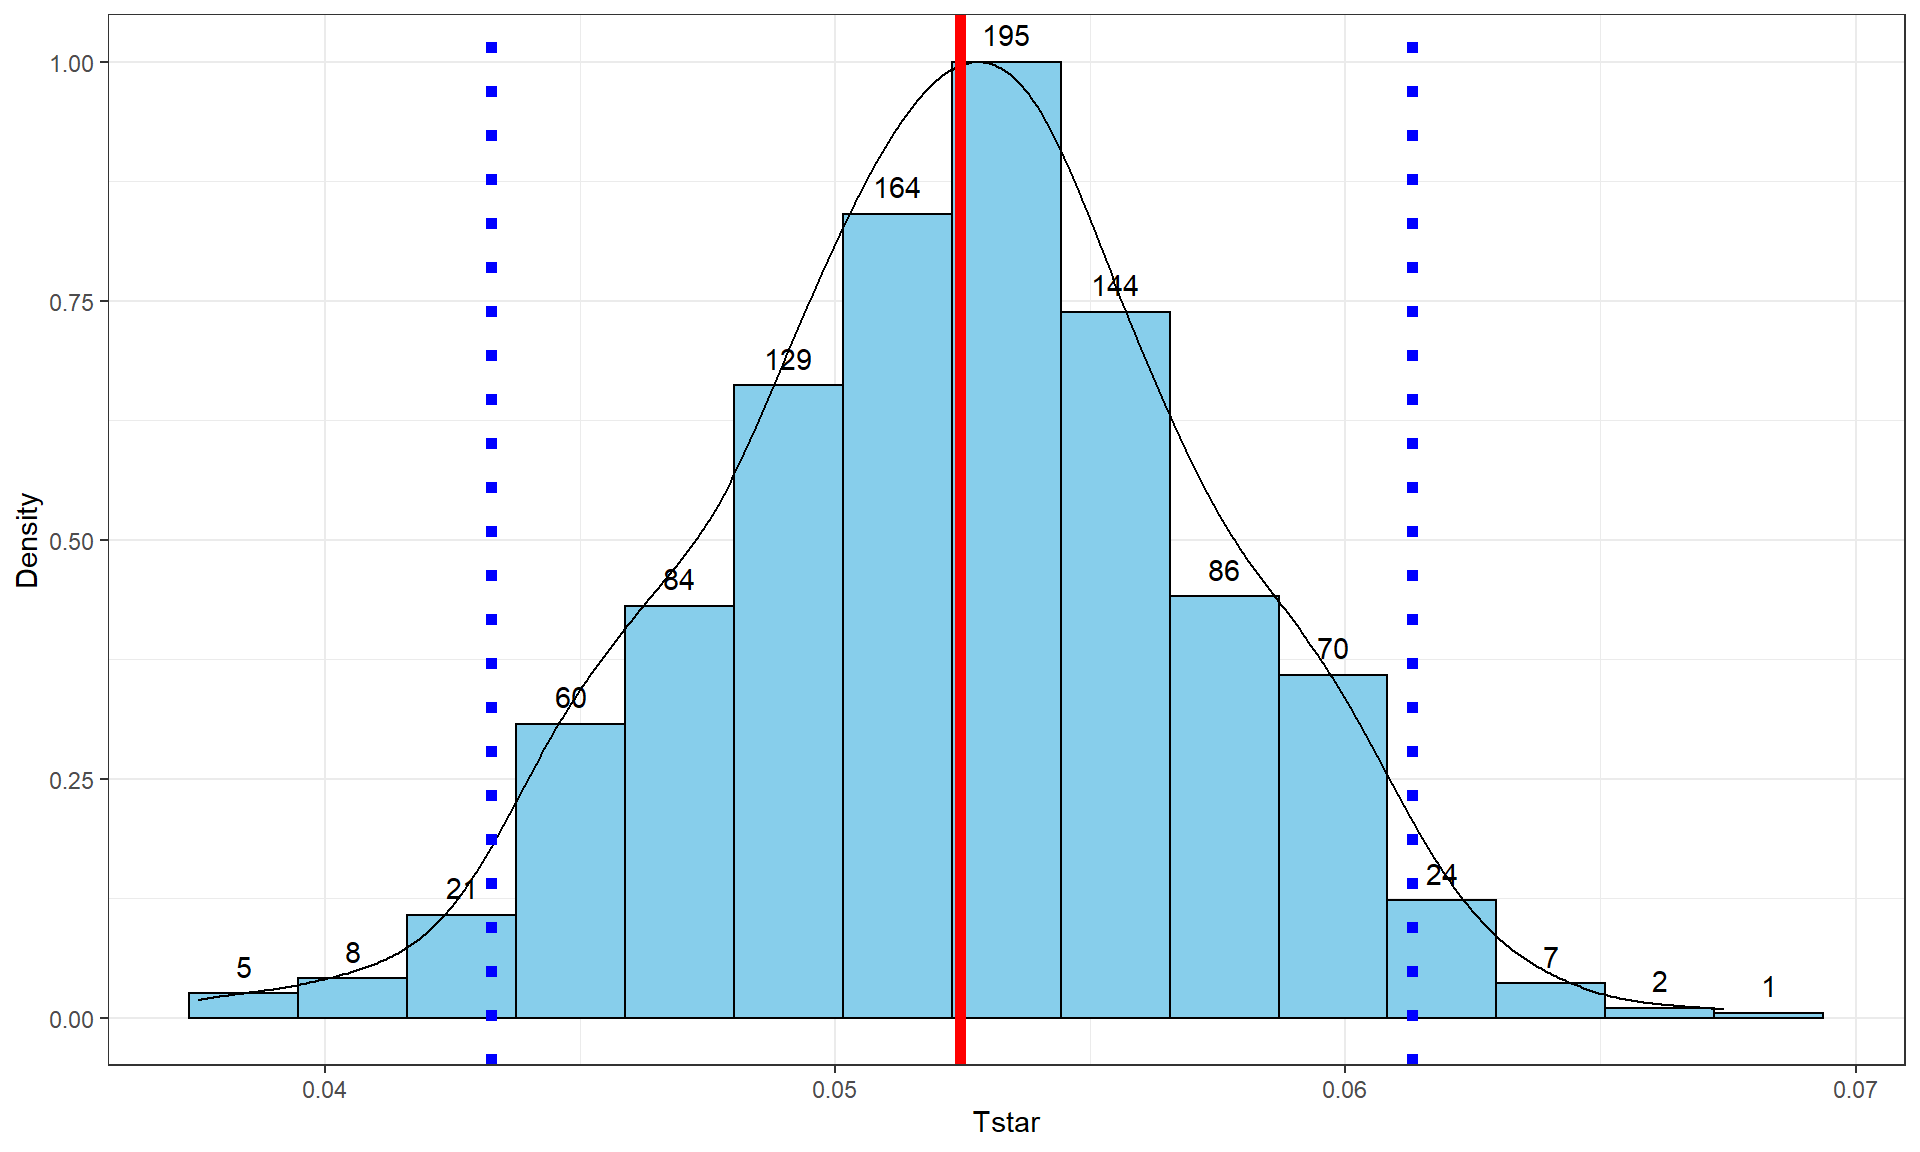 Bootstrap distribution of the slope coefficient in the Bozeman temperature linear regression model with bold dashed vertical lines delineating the 95% confidence interval and the bold solid line the observed slope of 0.052.